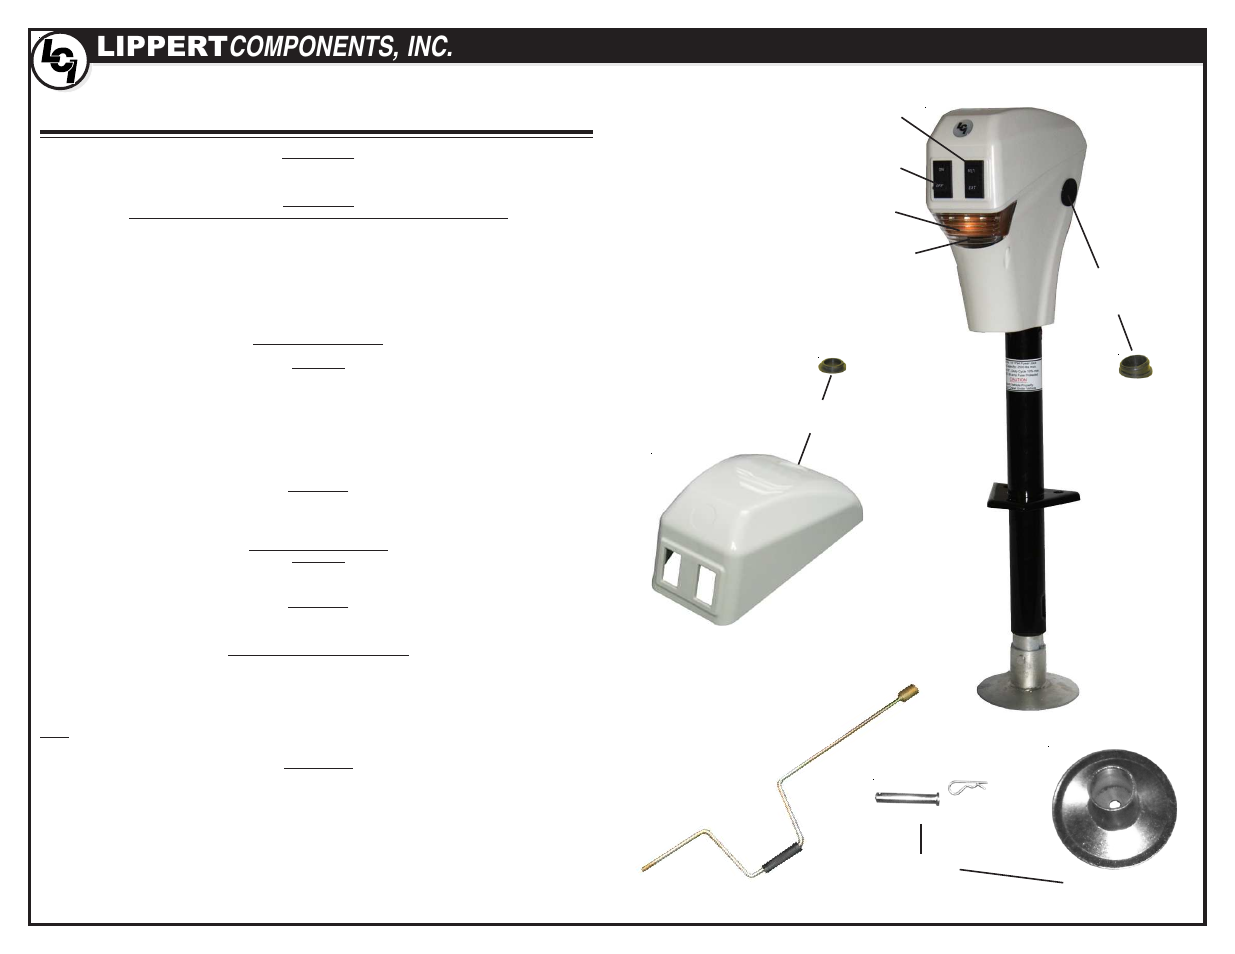 Lippert Components Electric Tongue Jack User Manual | 1 page